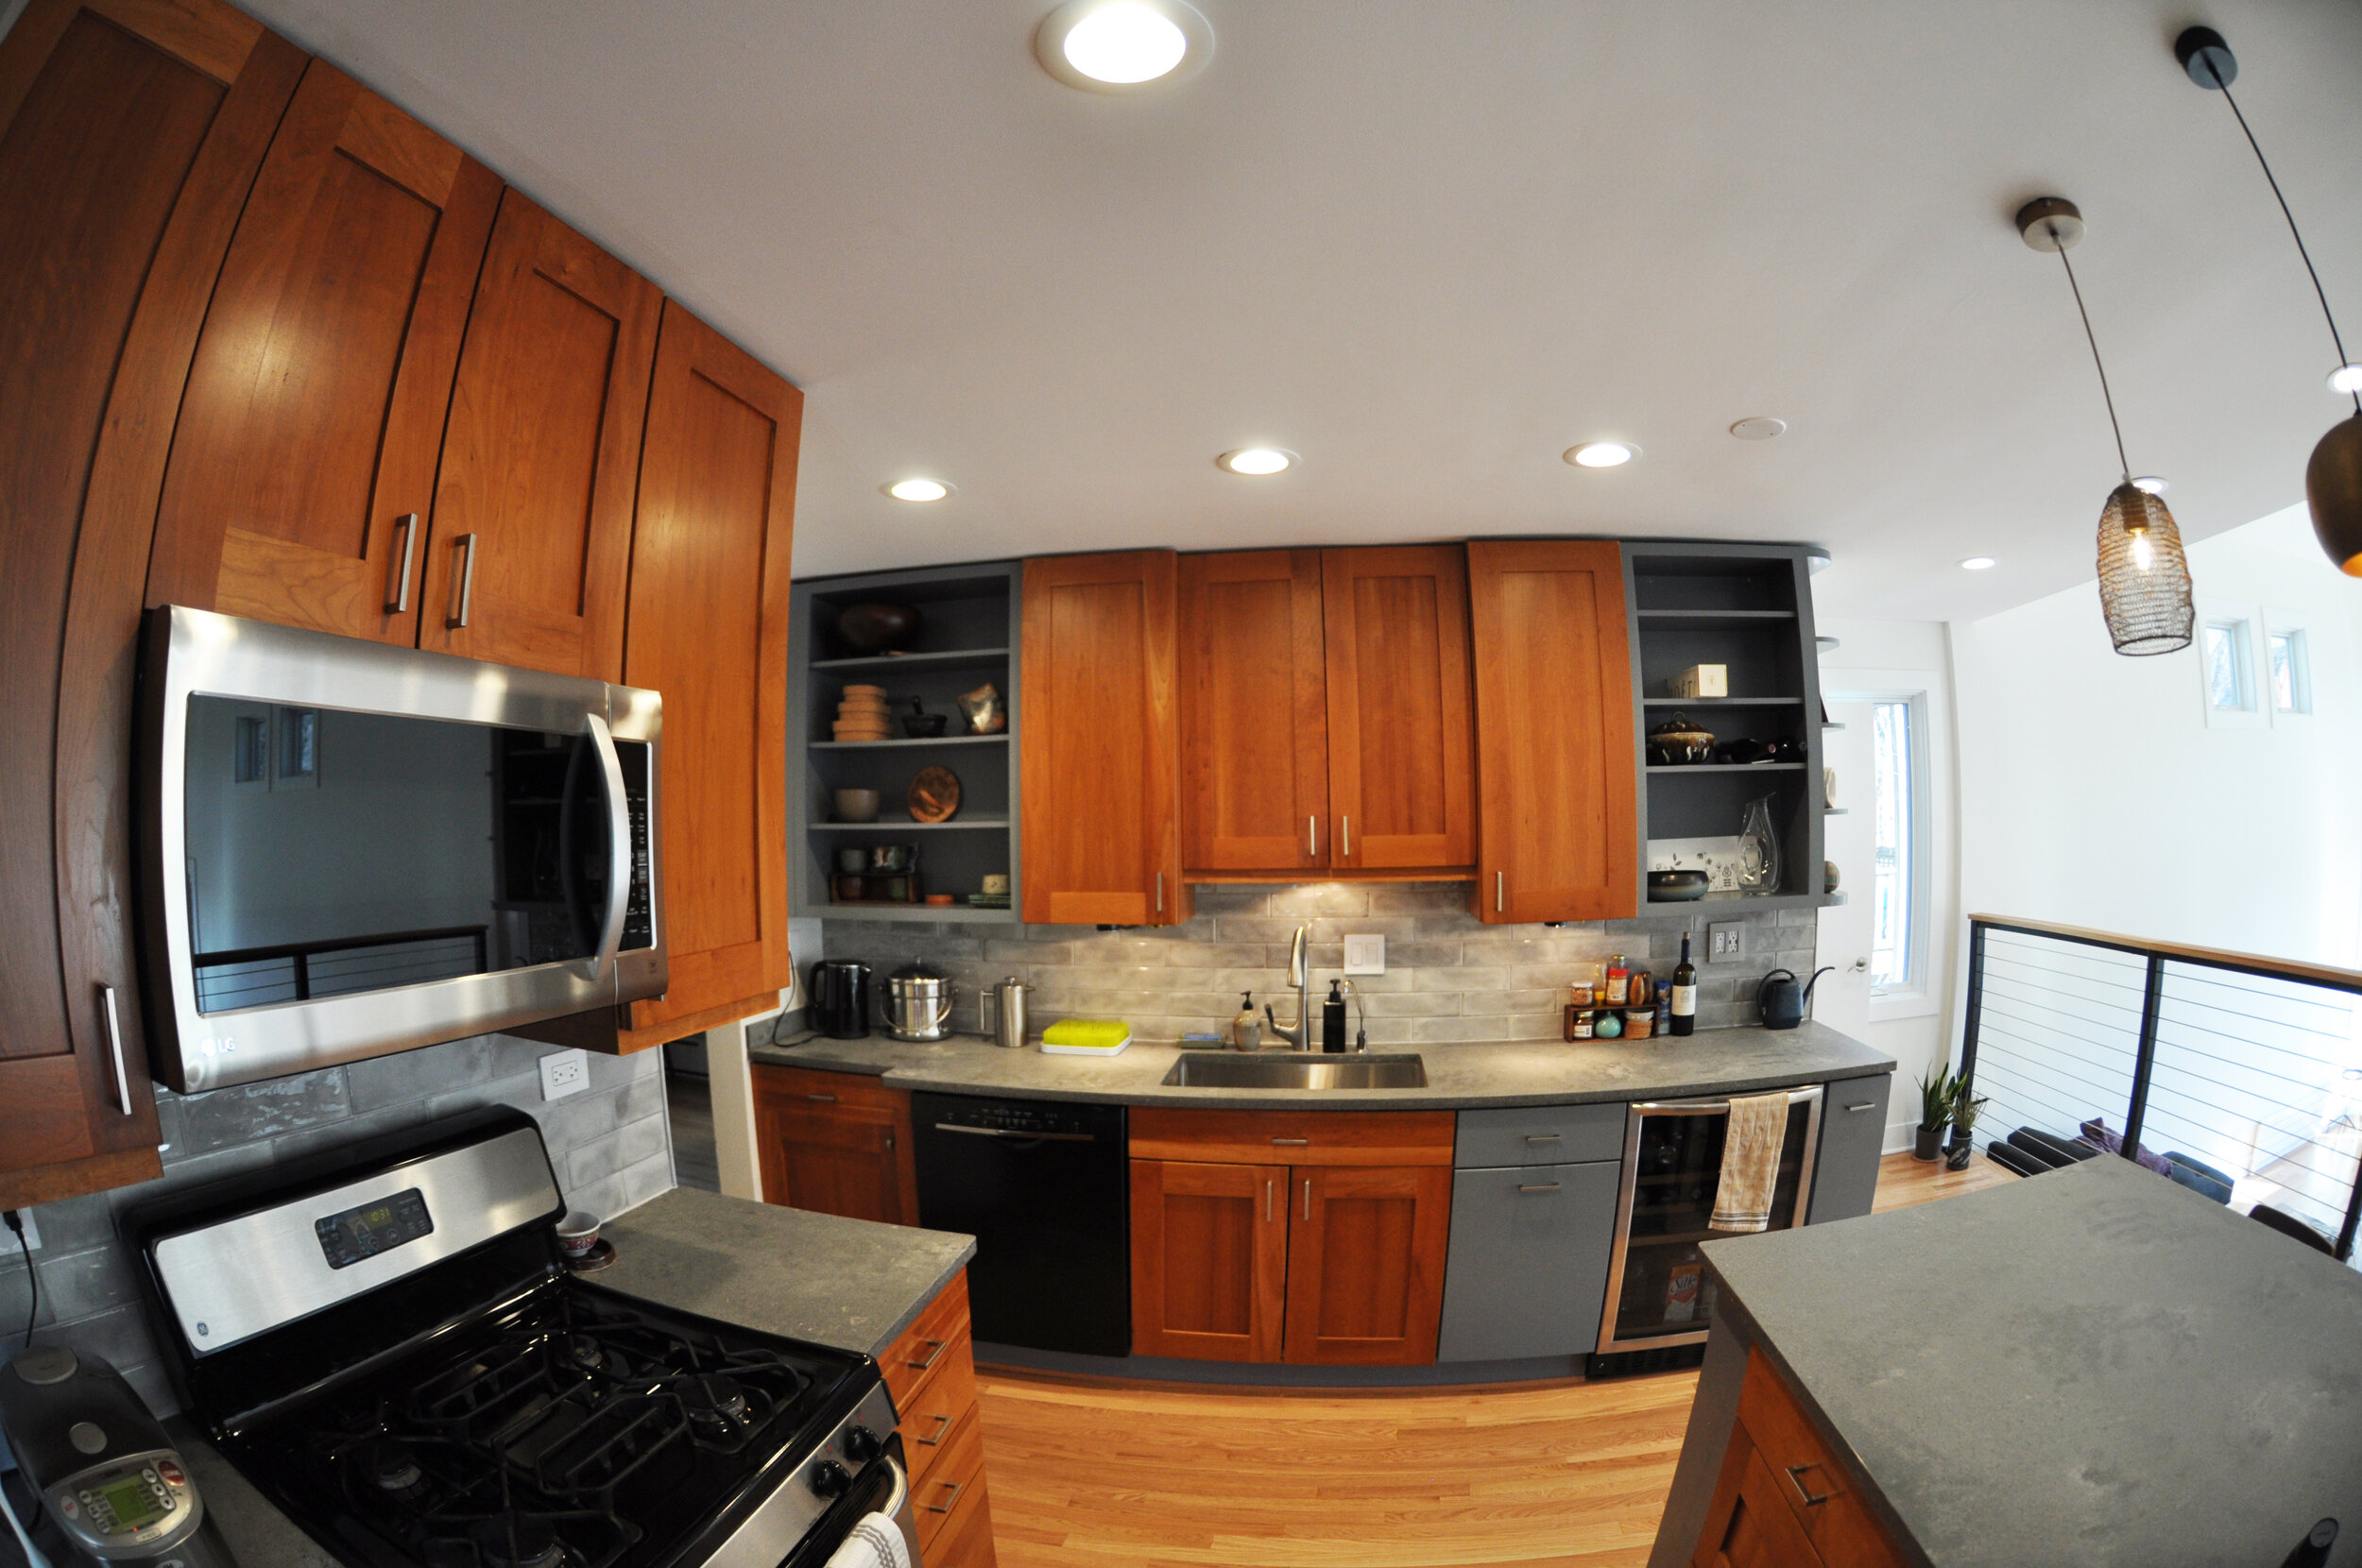 fisheye view of renovated kitchen with hardwood floors and grey and wood cabinets